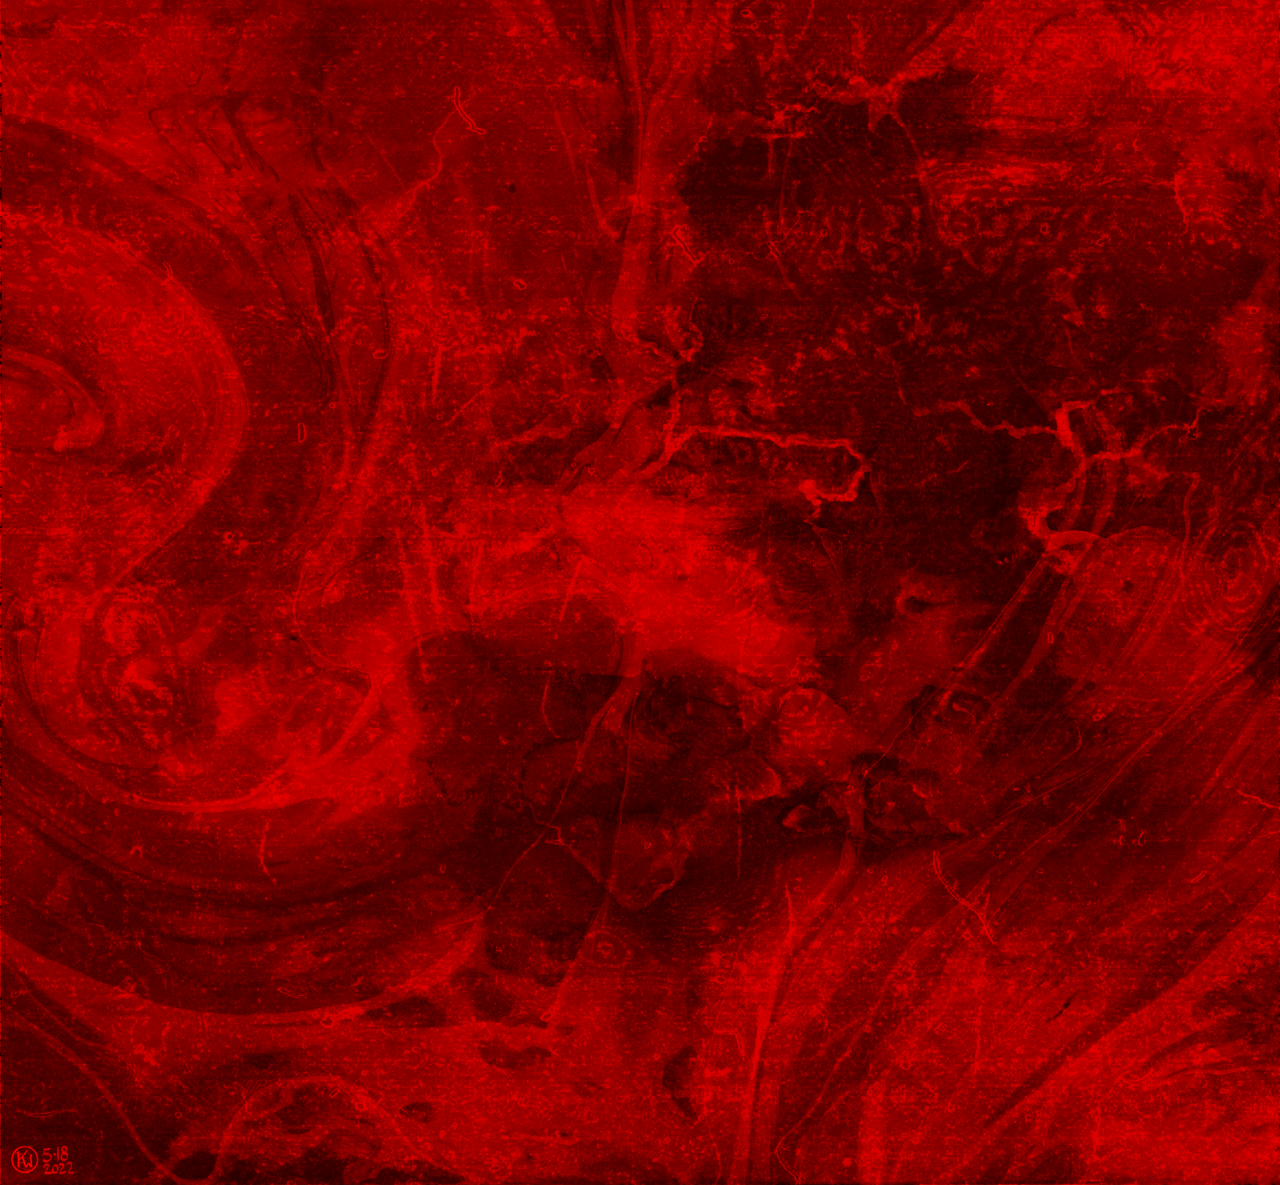 horrifyingly red abstract shapes